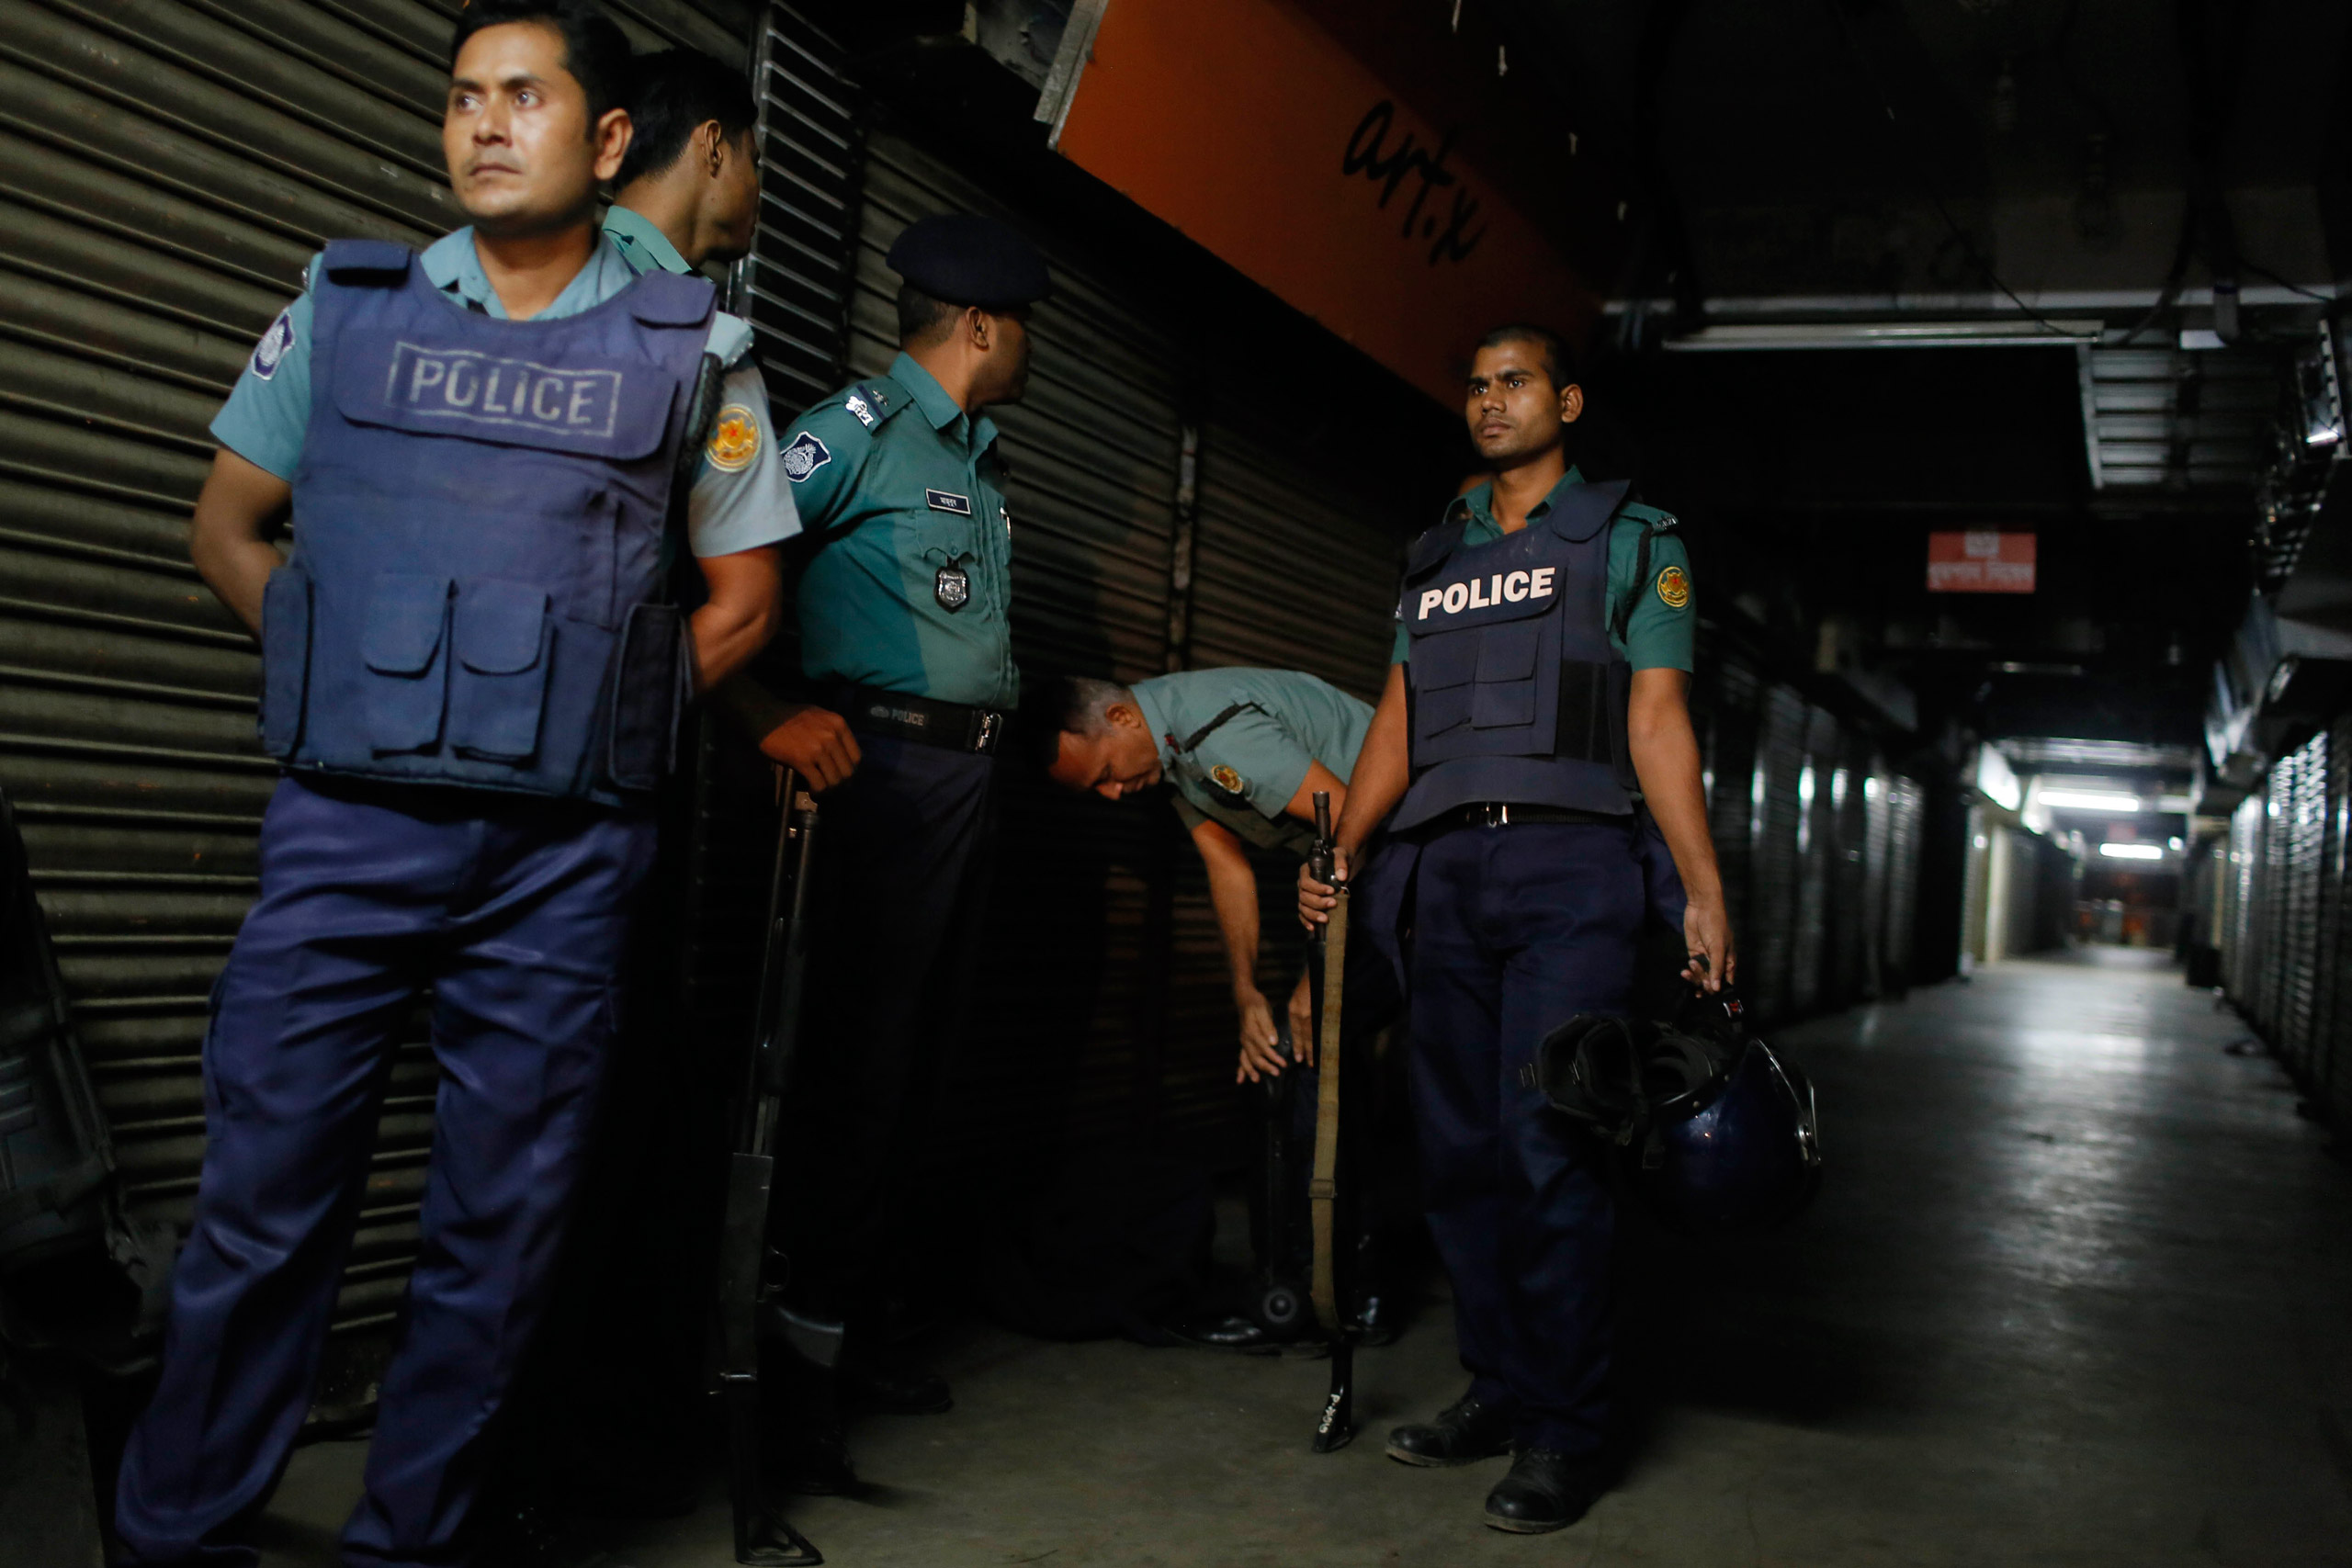 Bangladeshi security officers stand guard at the site where the slaughtered body of Faisal Arefin Deepan was found in Dhaka, Bangladesh, on Oct. 31, 2015. (A.M. Ahad—AP)